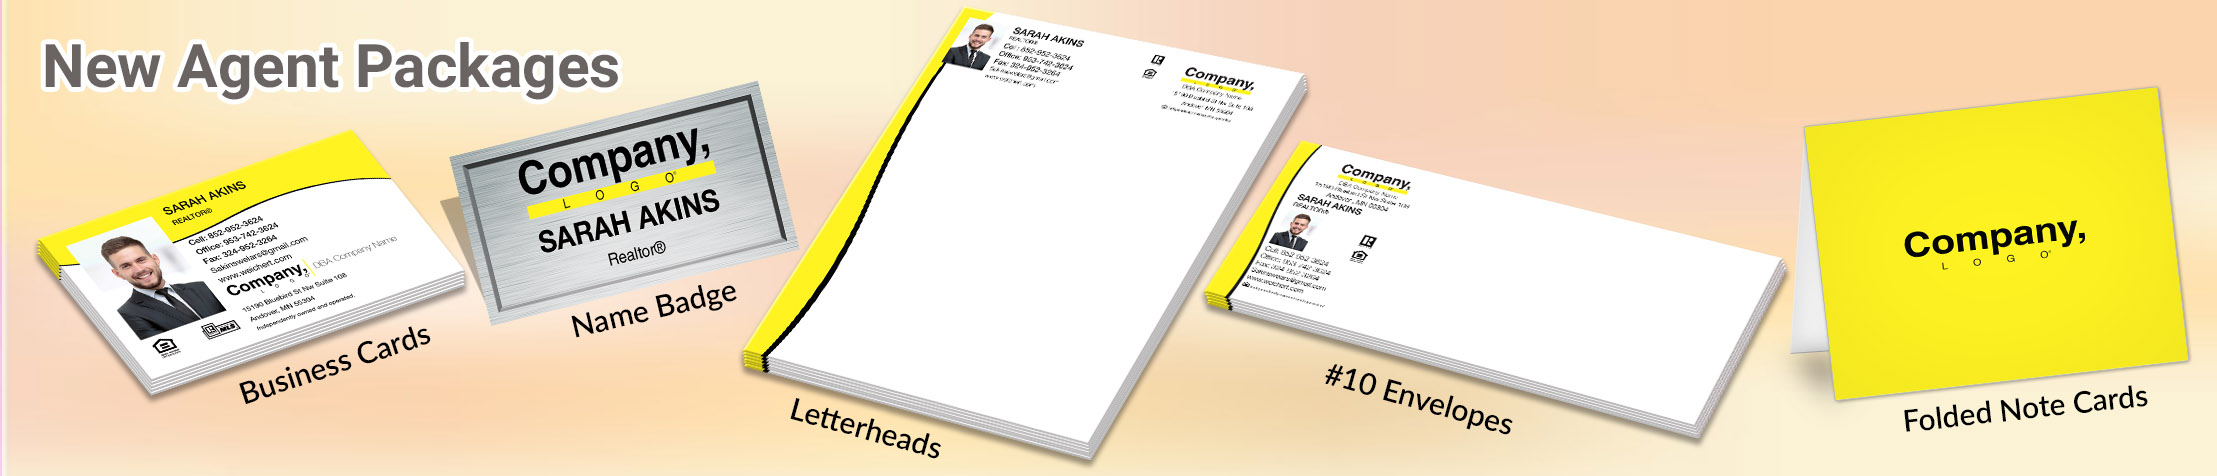 Weichert Real Estate Gold, Silver and Bronze Agent Packages -  personalized business cards, letterhead, envelopes and note cards | BestPrintBuy.com